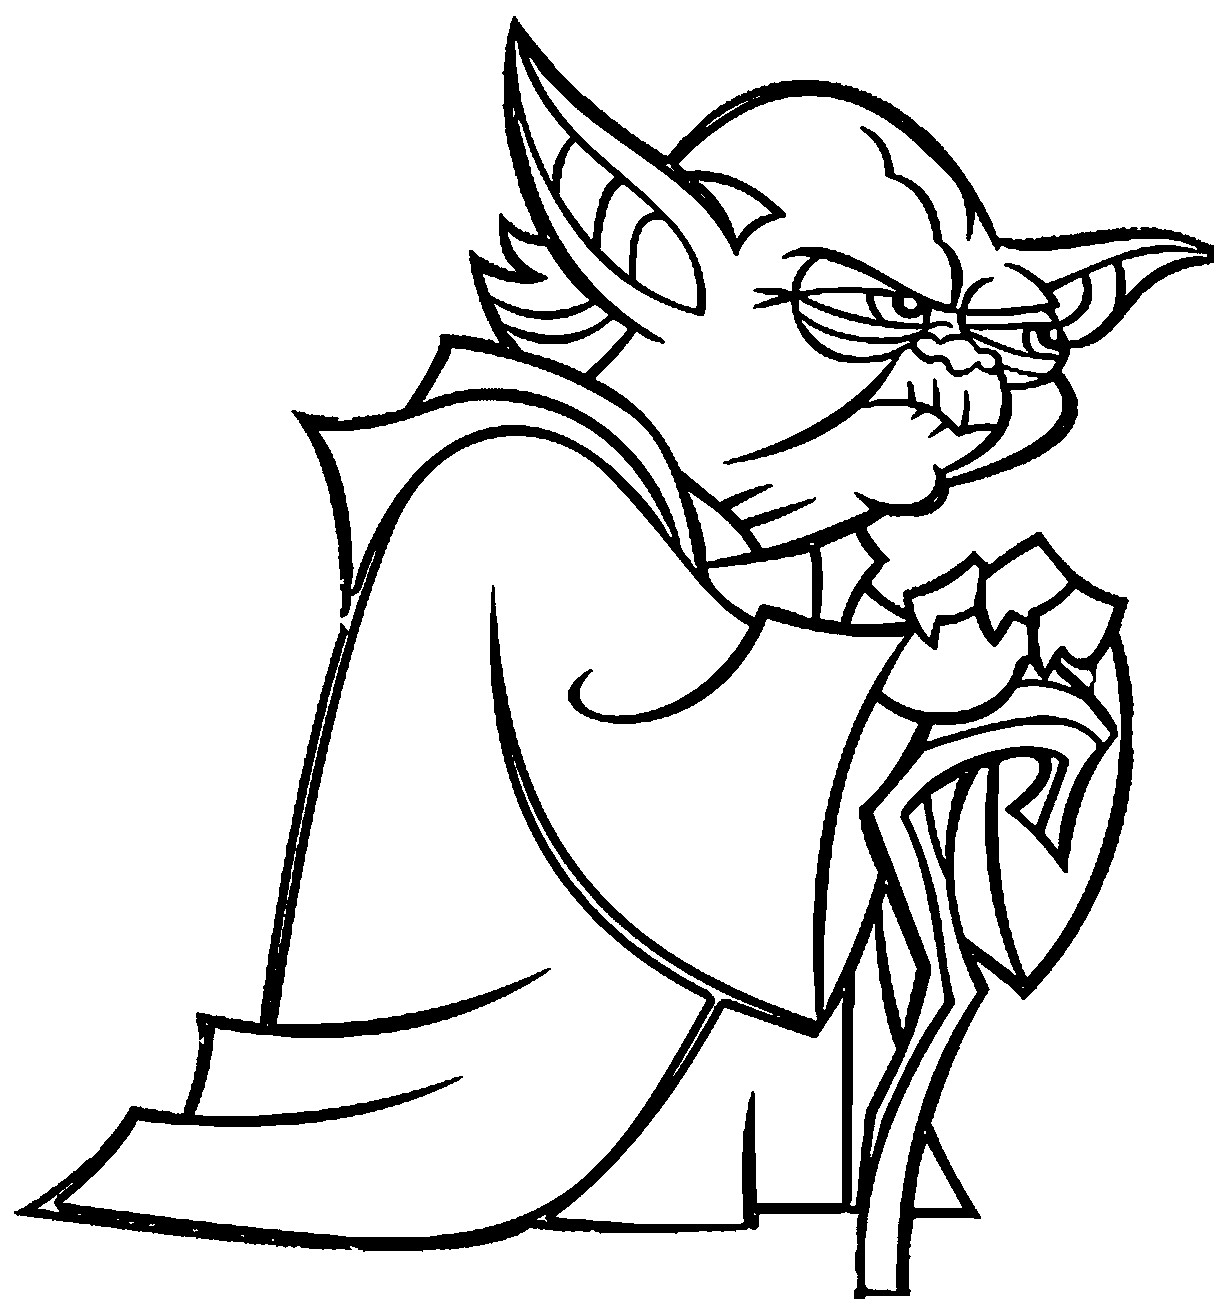 Star Wars Printable Coloring Pages
 Star Wars Coloring Pages